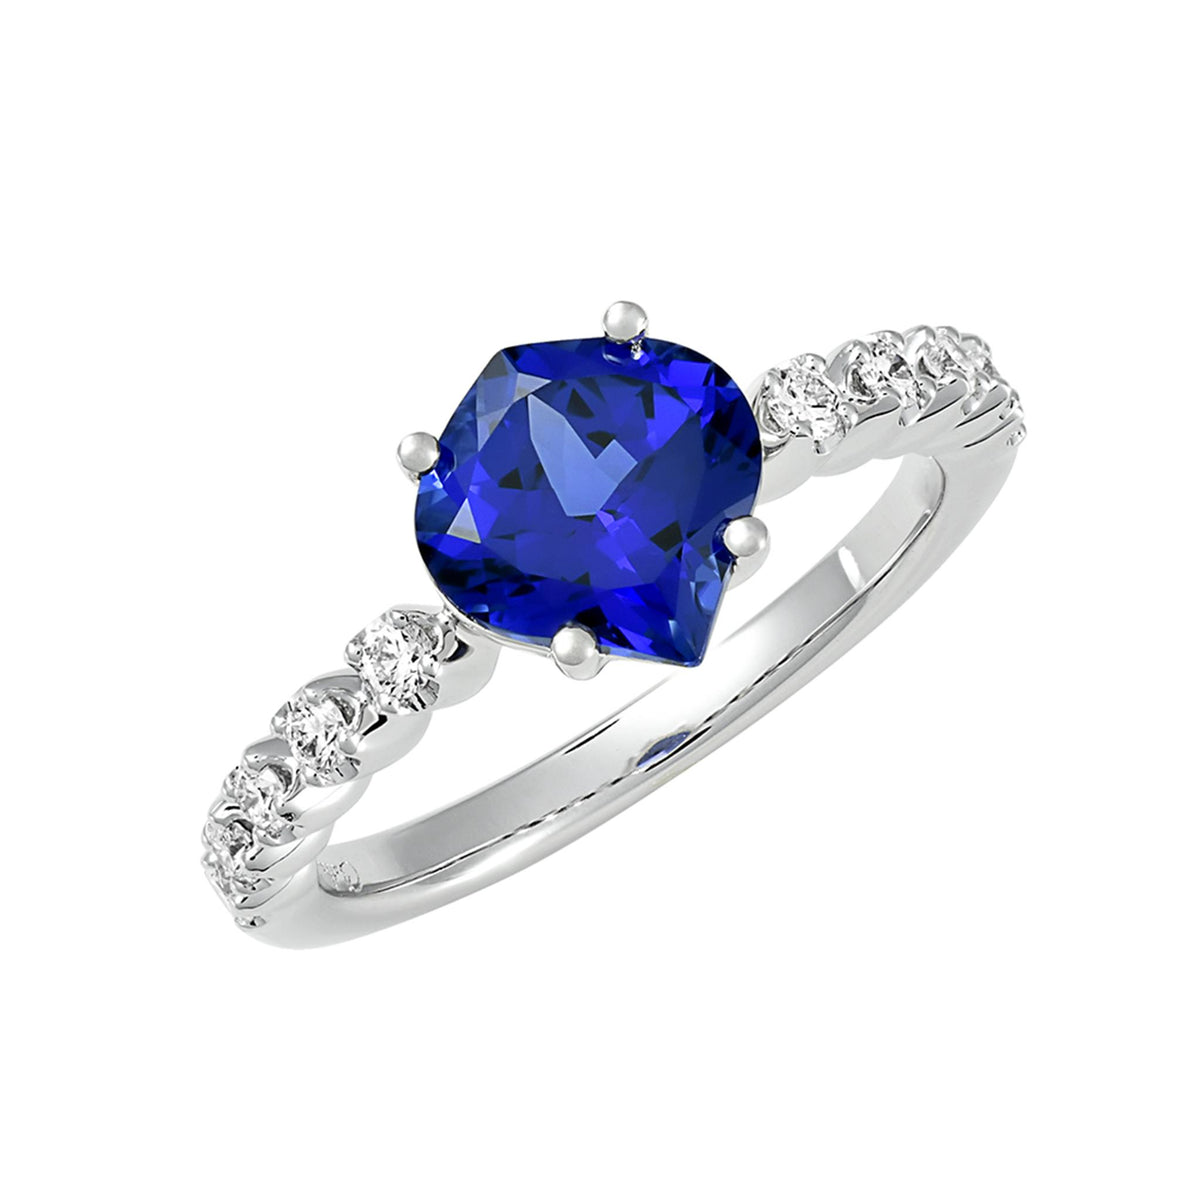 14Kt White Gold Ring With 2.12ct Chatham Lab Created Blue Sapphire